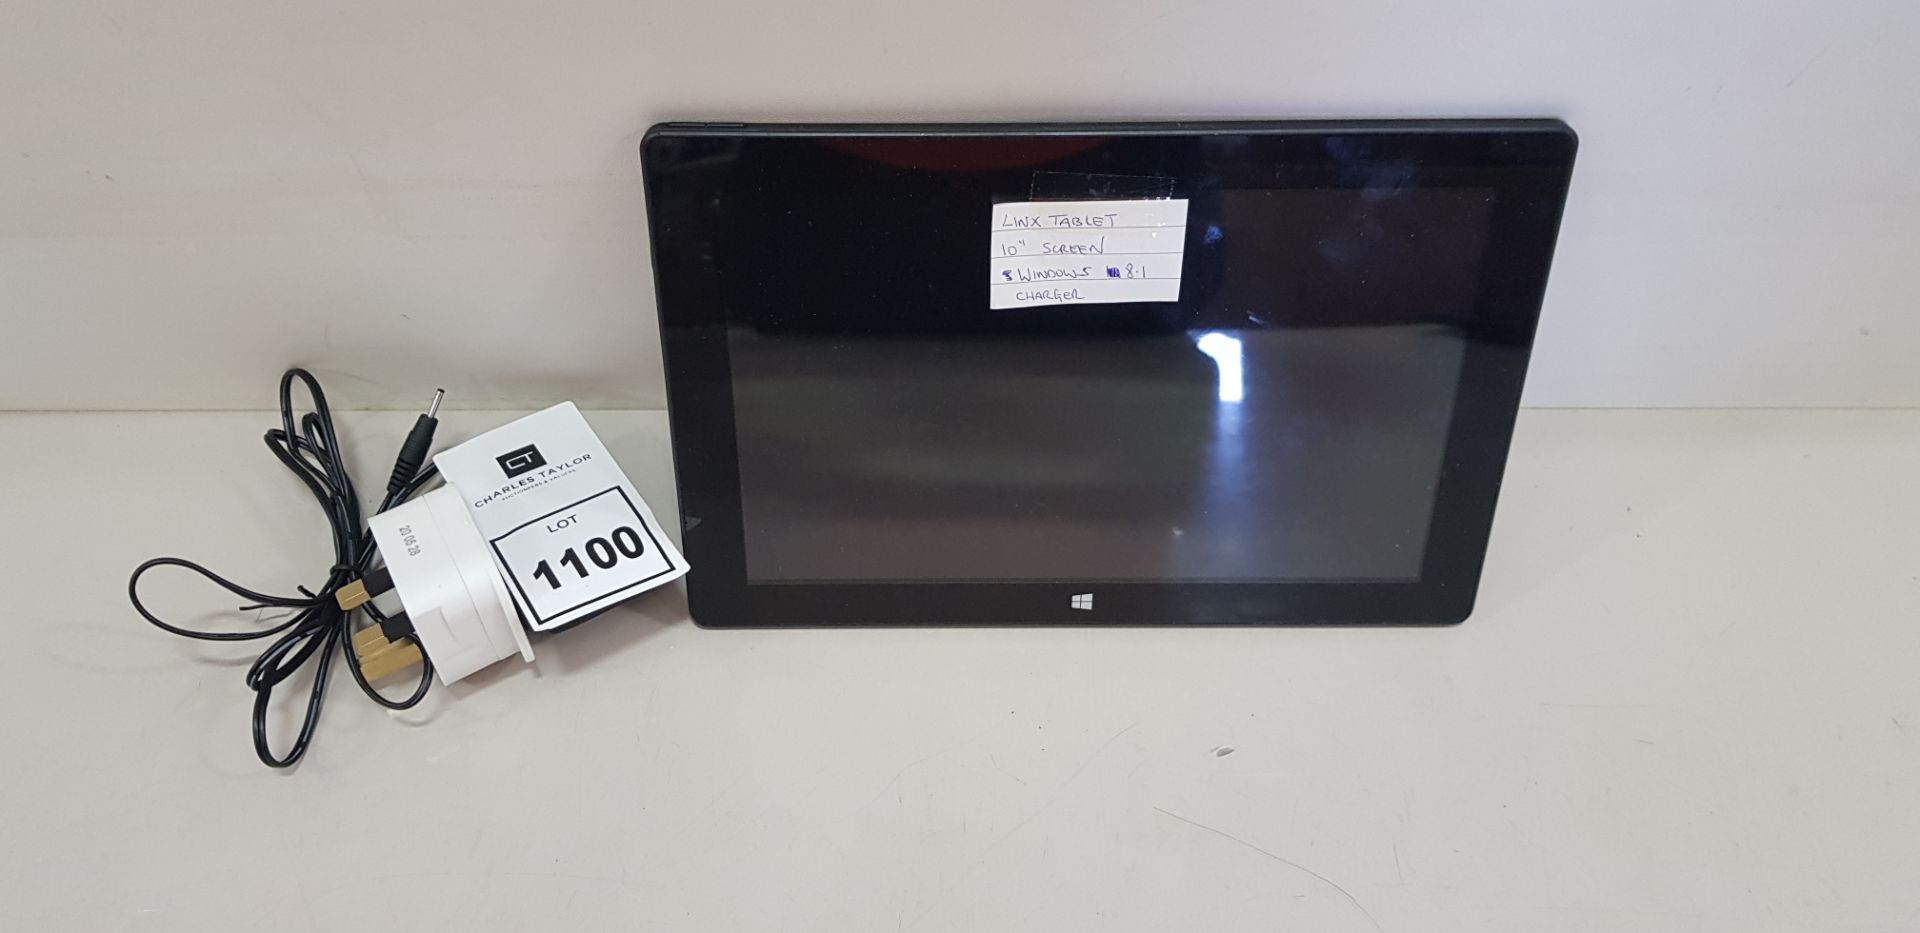 LINX TABLET 10 SCREEN WINDOWS 8.1 CHARGER